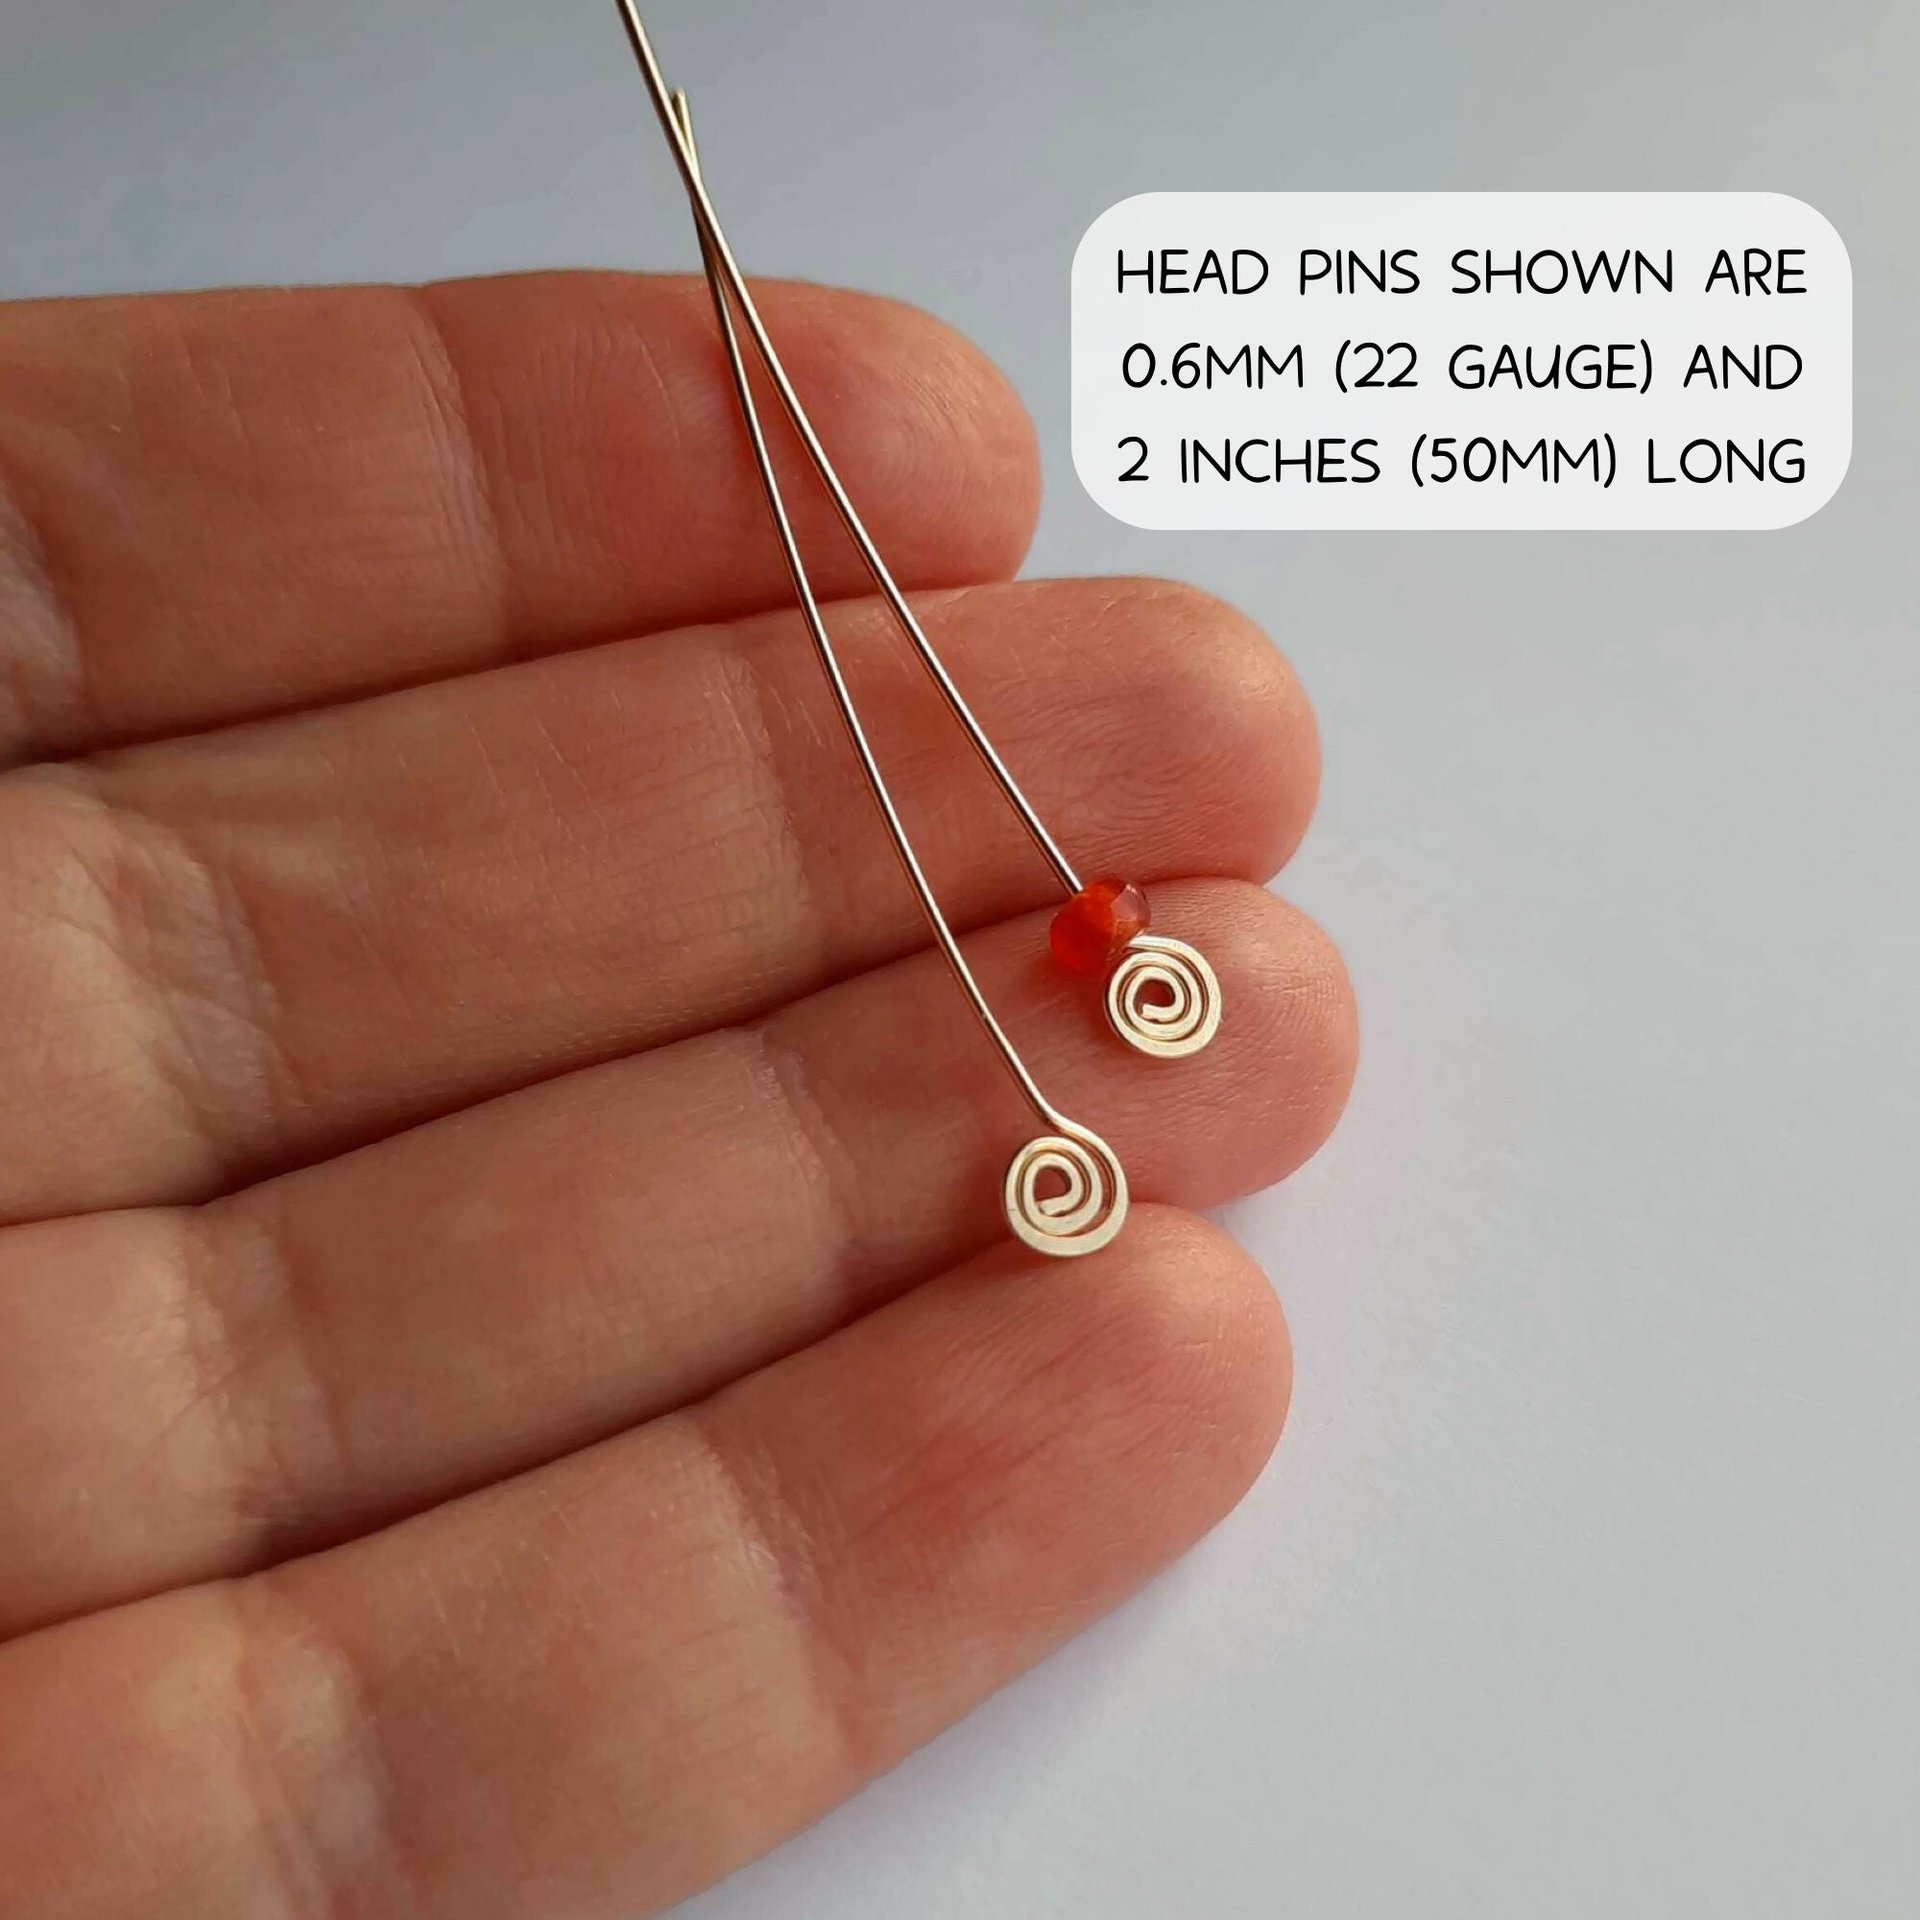 Pair of 14 Carat Gold Filled Spiral End Head Pins, handcrafted by The Tiny Tree Frog Jewellery 